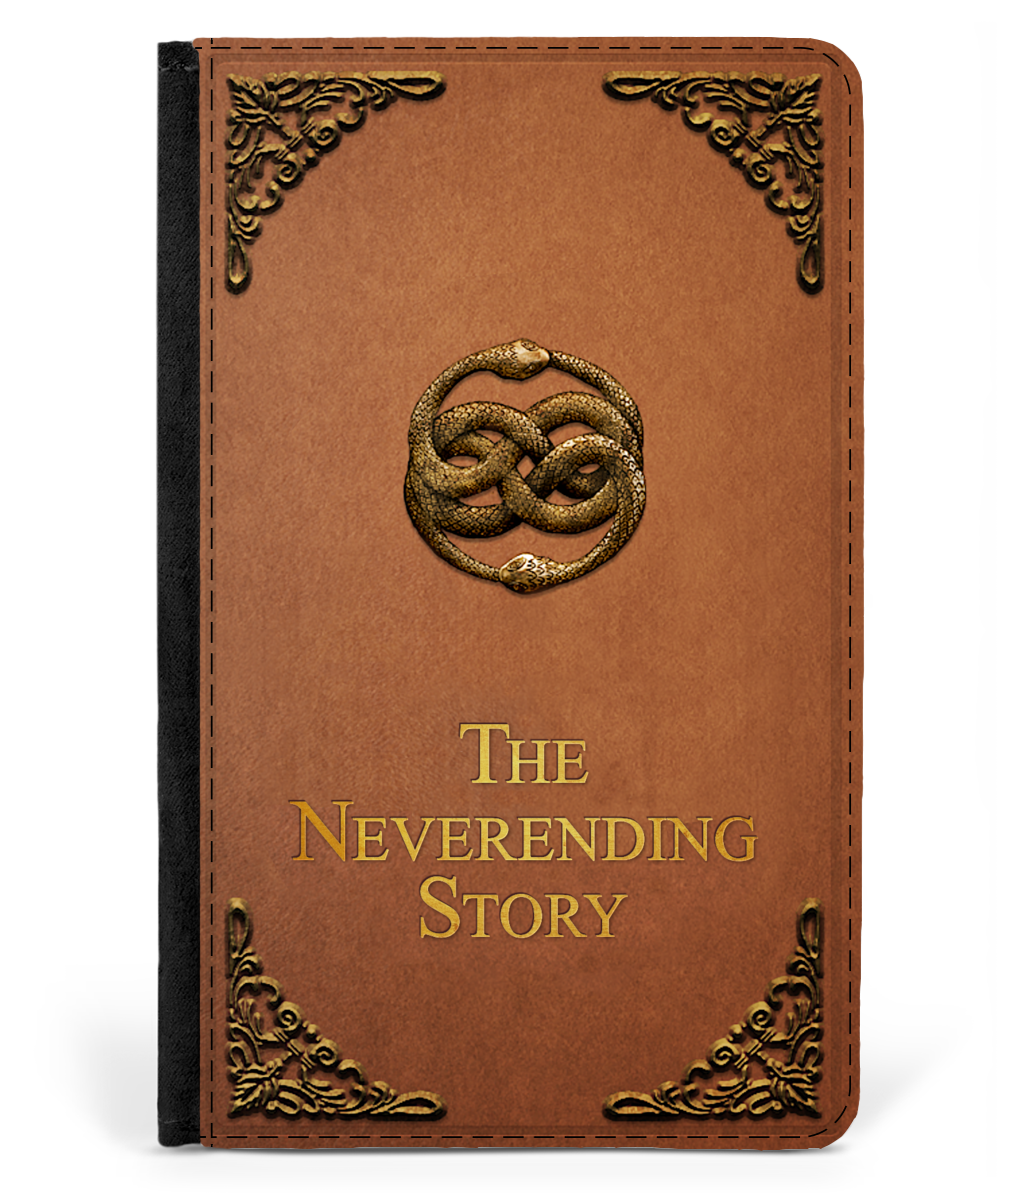 the-neverending-story-book-cover-design-faux-leather-passport-protector-2703-p